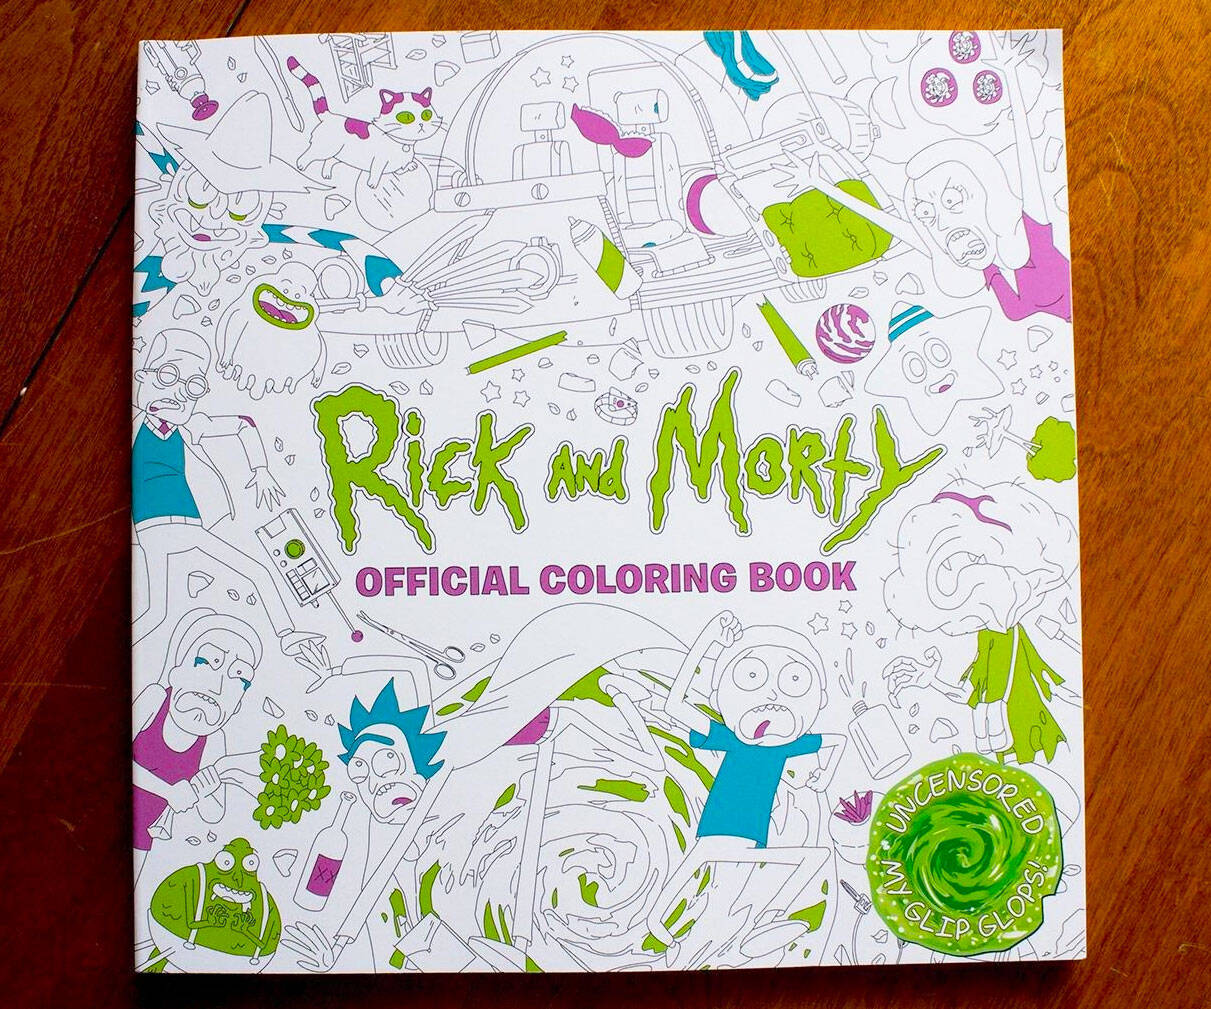 Rick & Morty Official Coloring Book - //coolthings.us